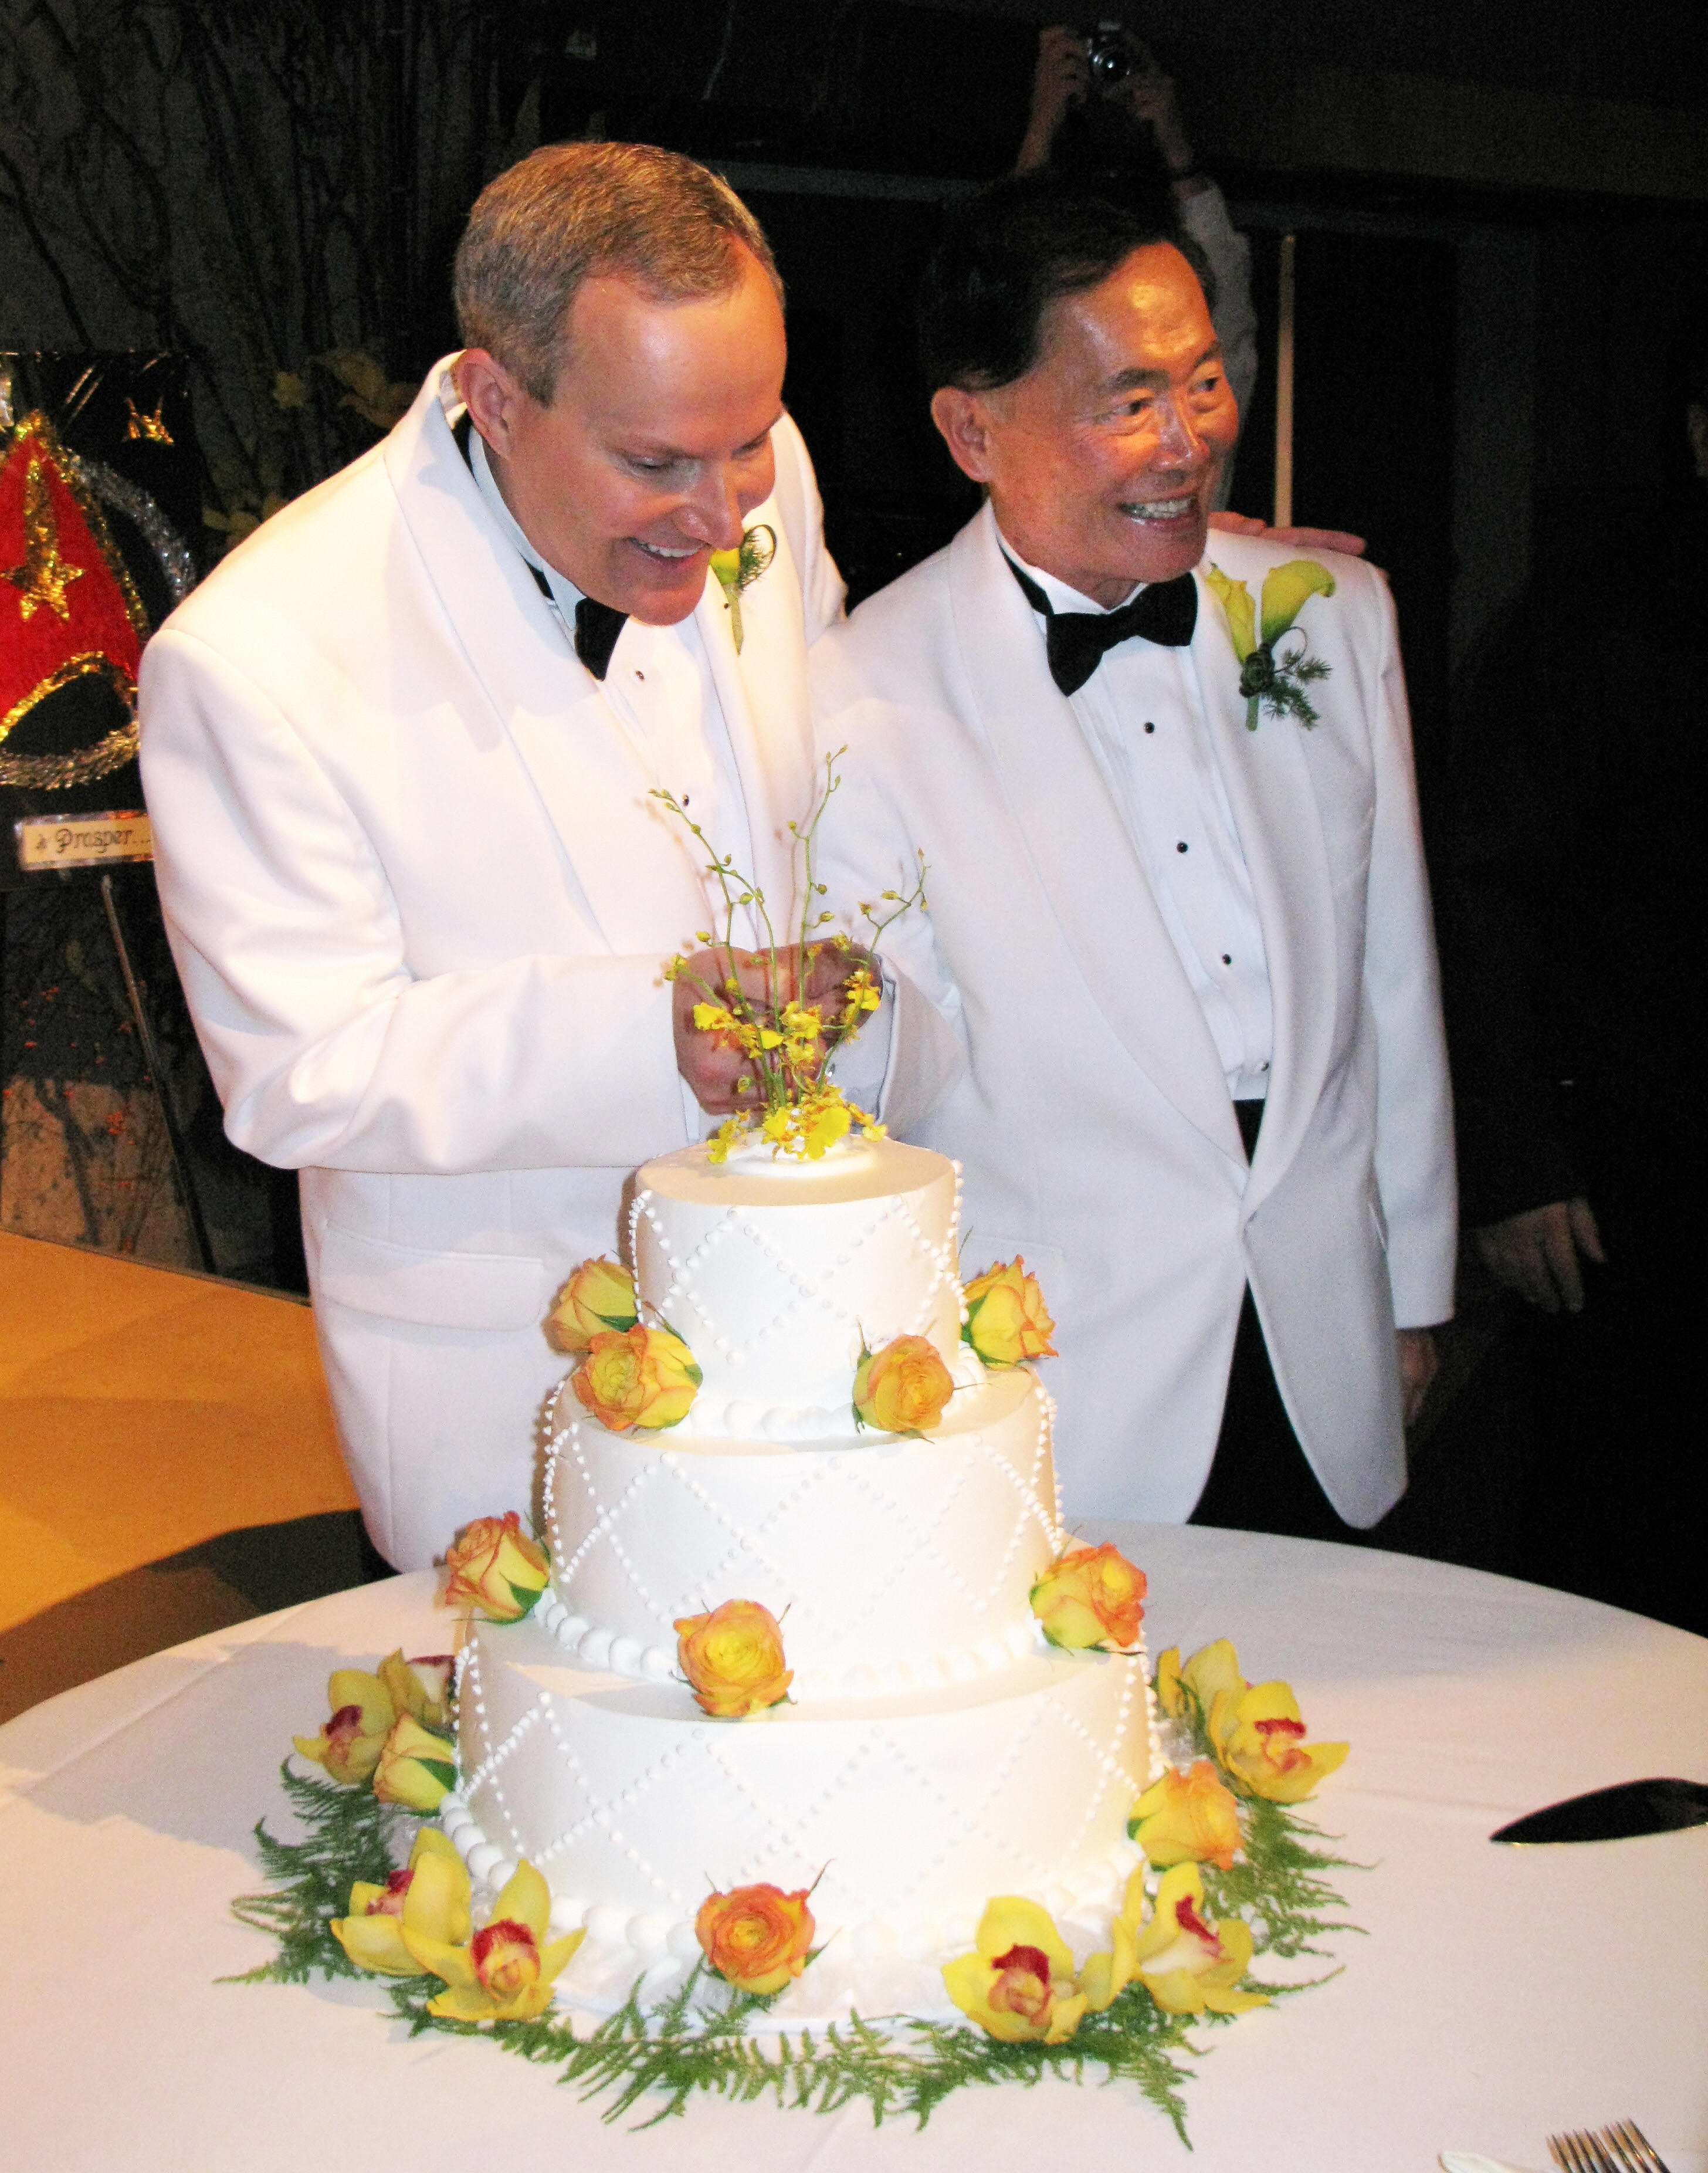 George Takei and Brad Altman at their wedding at the Japanese American National Museum on September 14, 2008 | Source: Getty Images